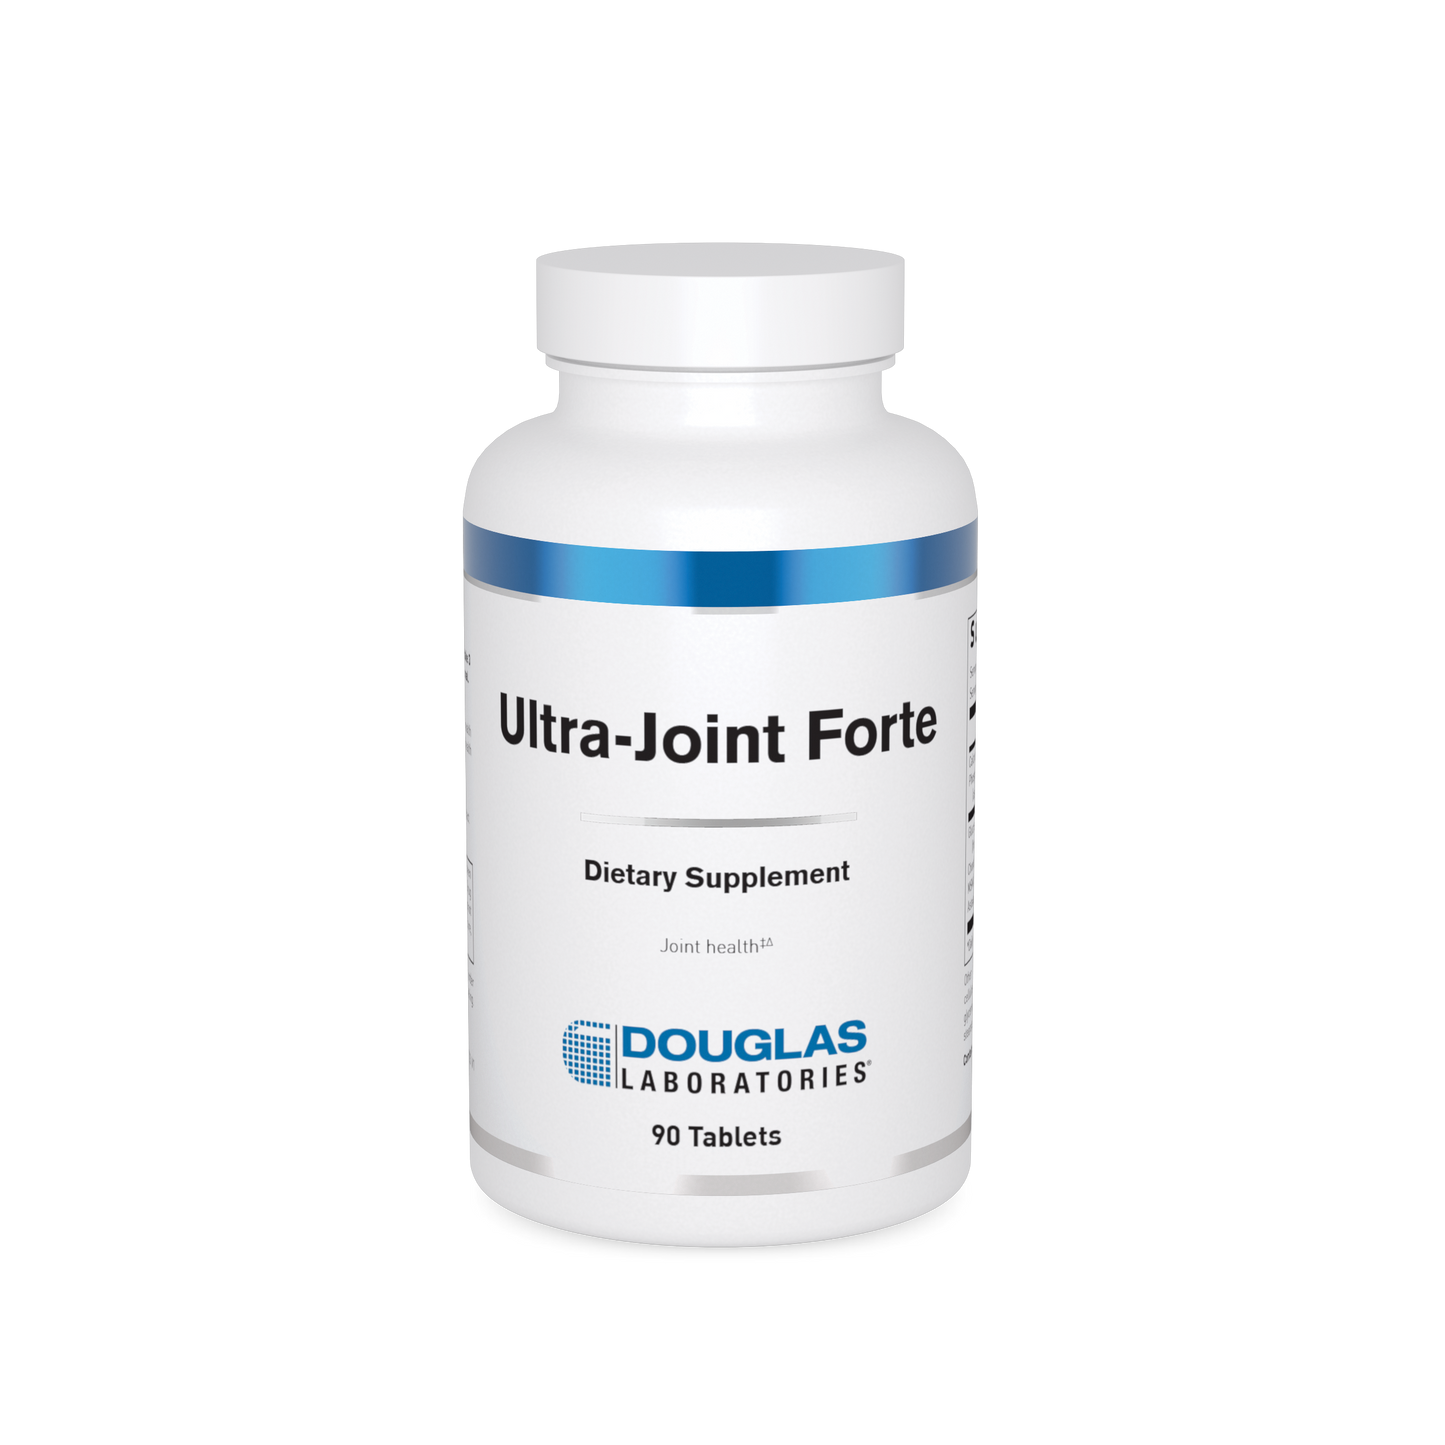 ULTRA-JOINT FORTE